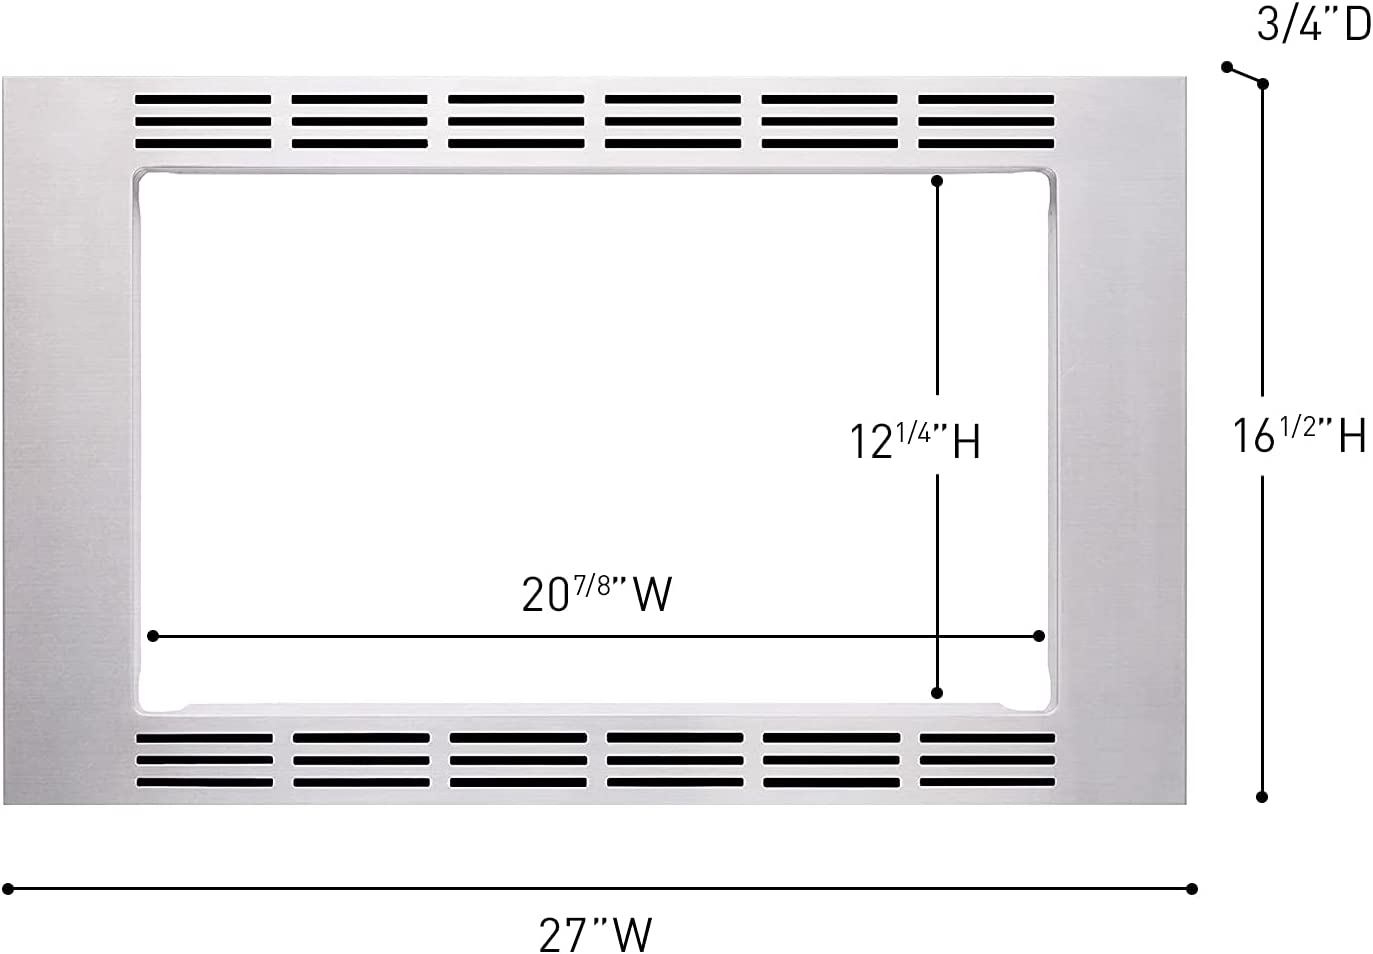 Panasonic 27 in. Wide Trim Kit for Panasonic's 1.2 cu. ft. Microwave Ovens in Stainless Steel (NN-TK621SS)